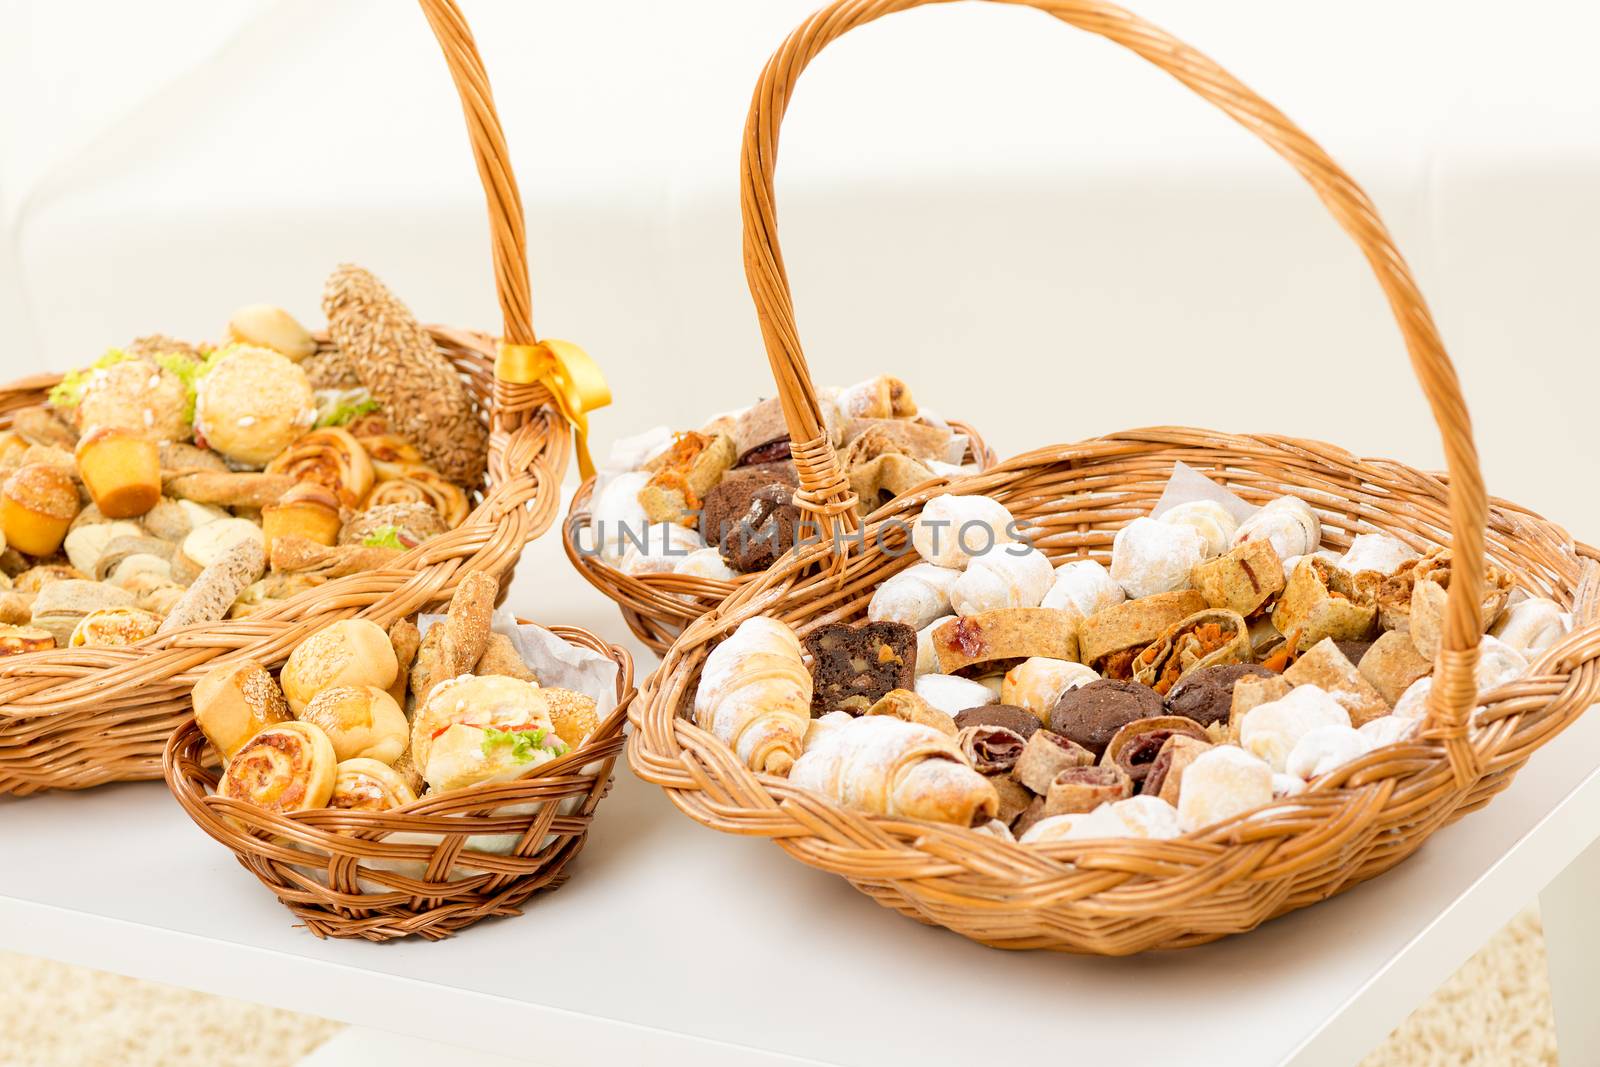 Wicker basket full of delicious sweet and savory baked goods.